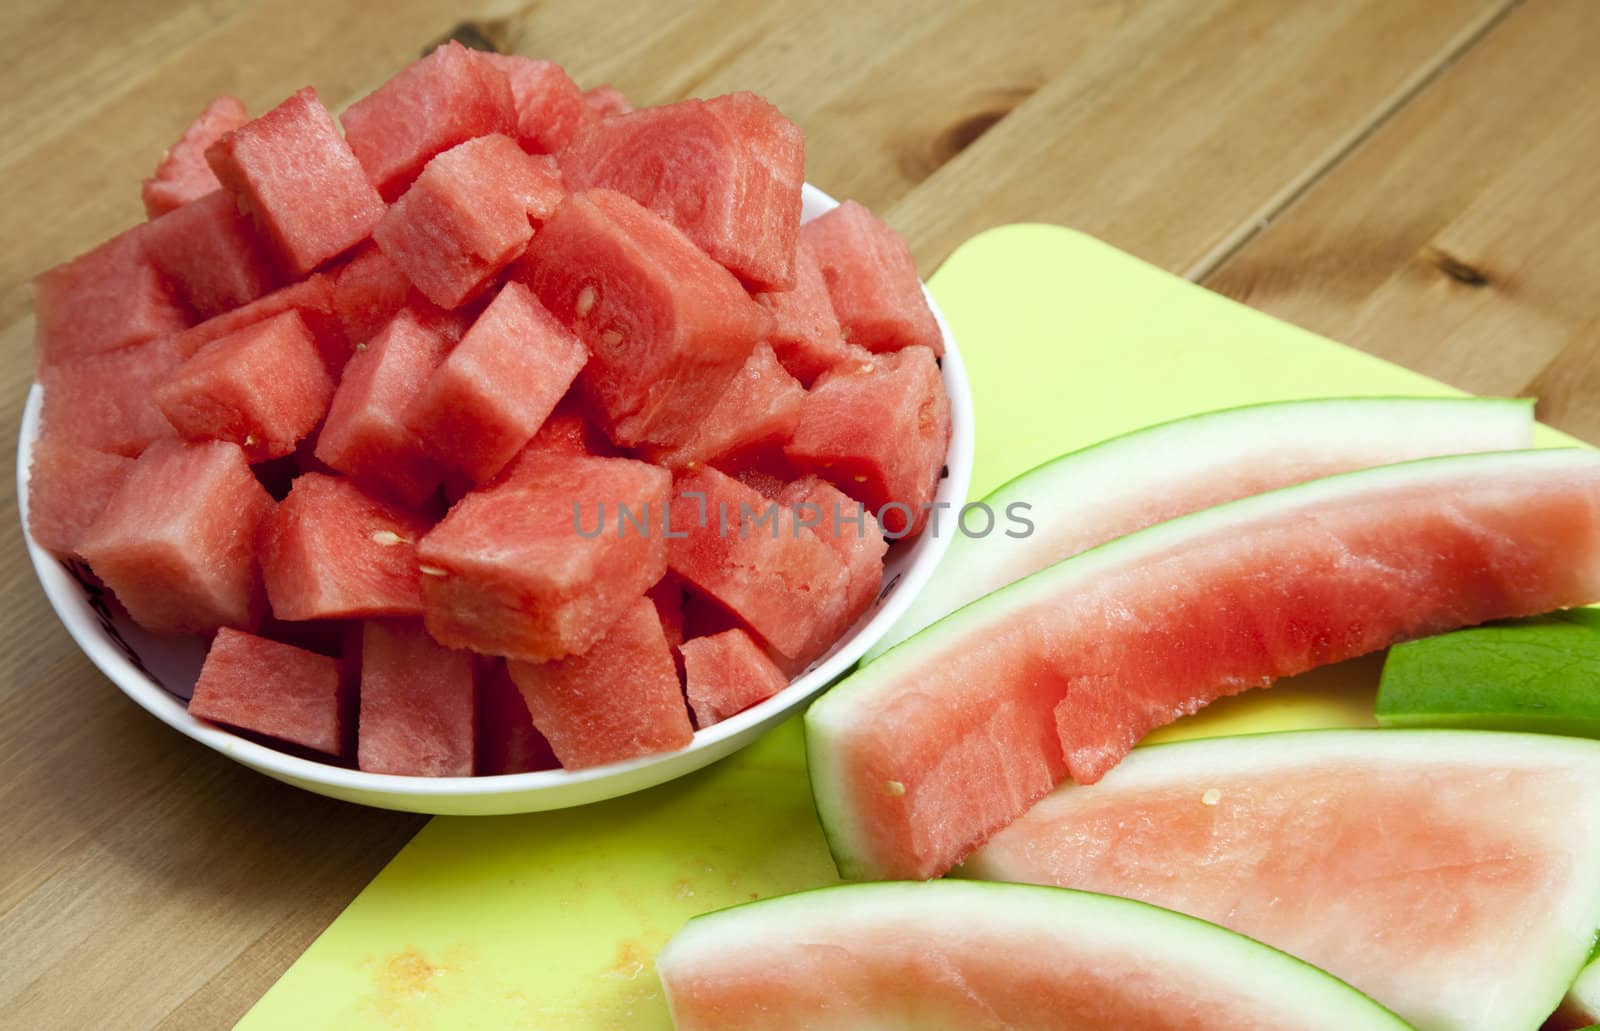 Watermelon and rind by monkeystock